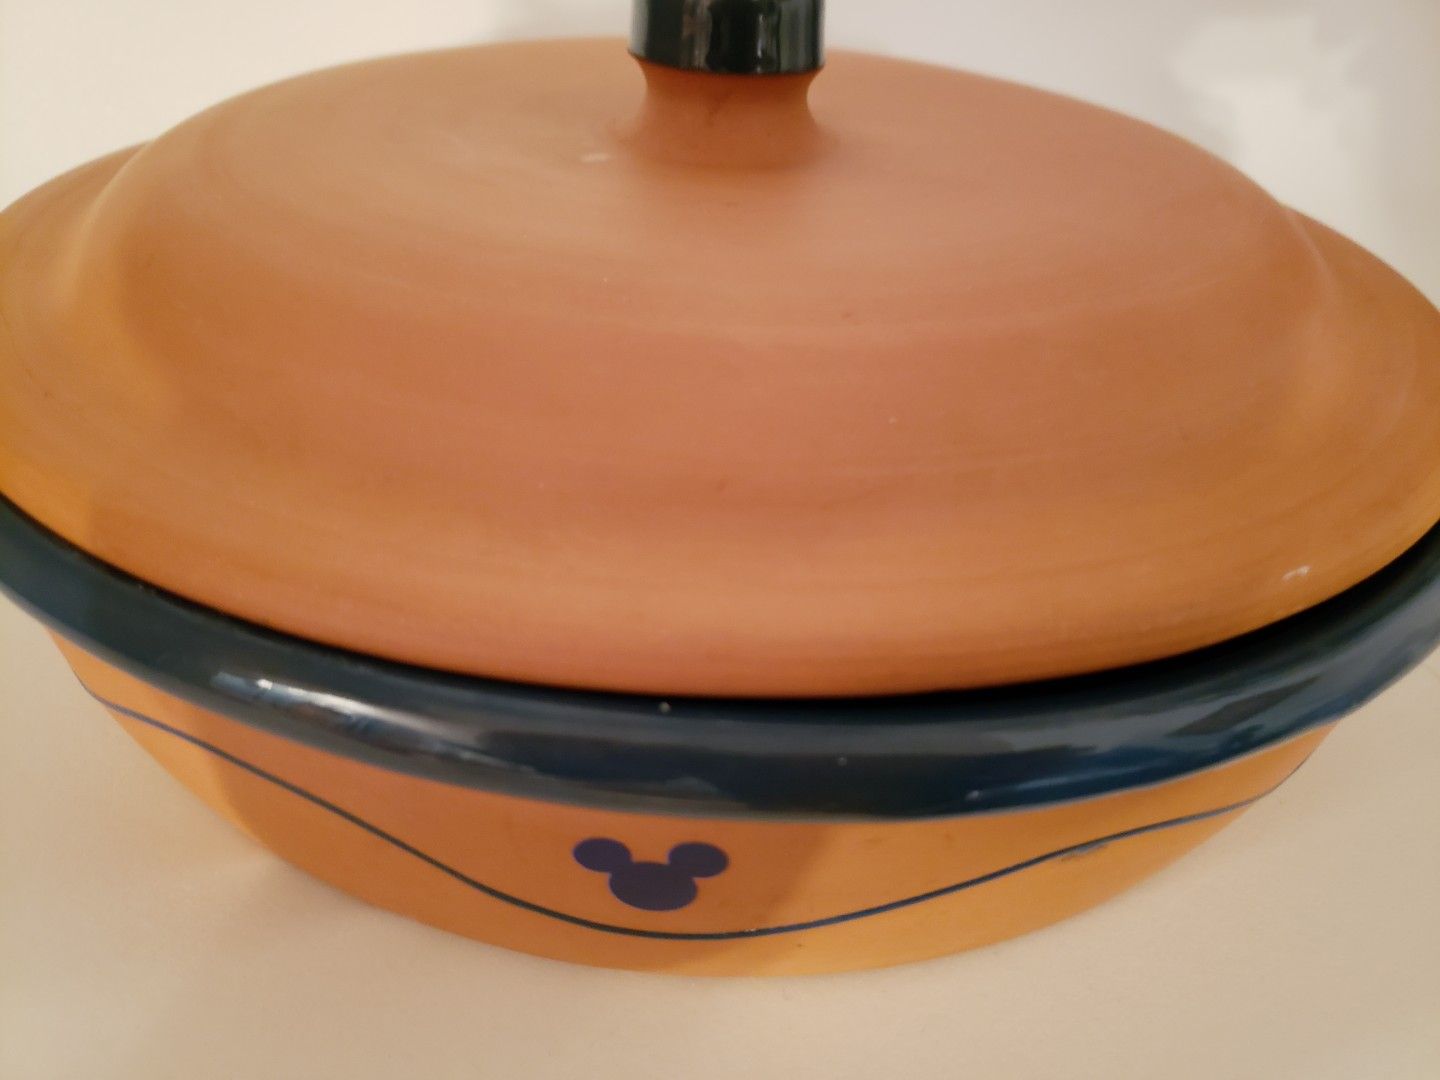 Disney Mickey Mouse covered terra cotta clay casserole